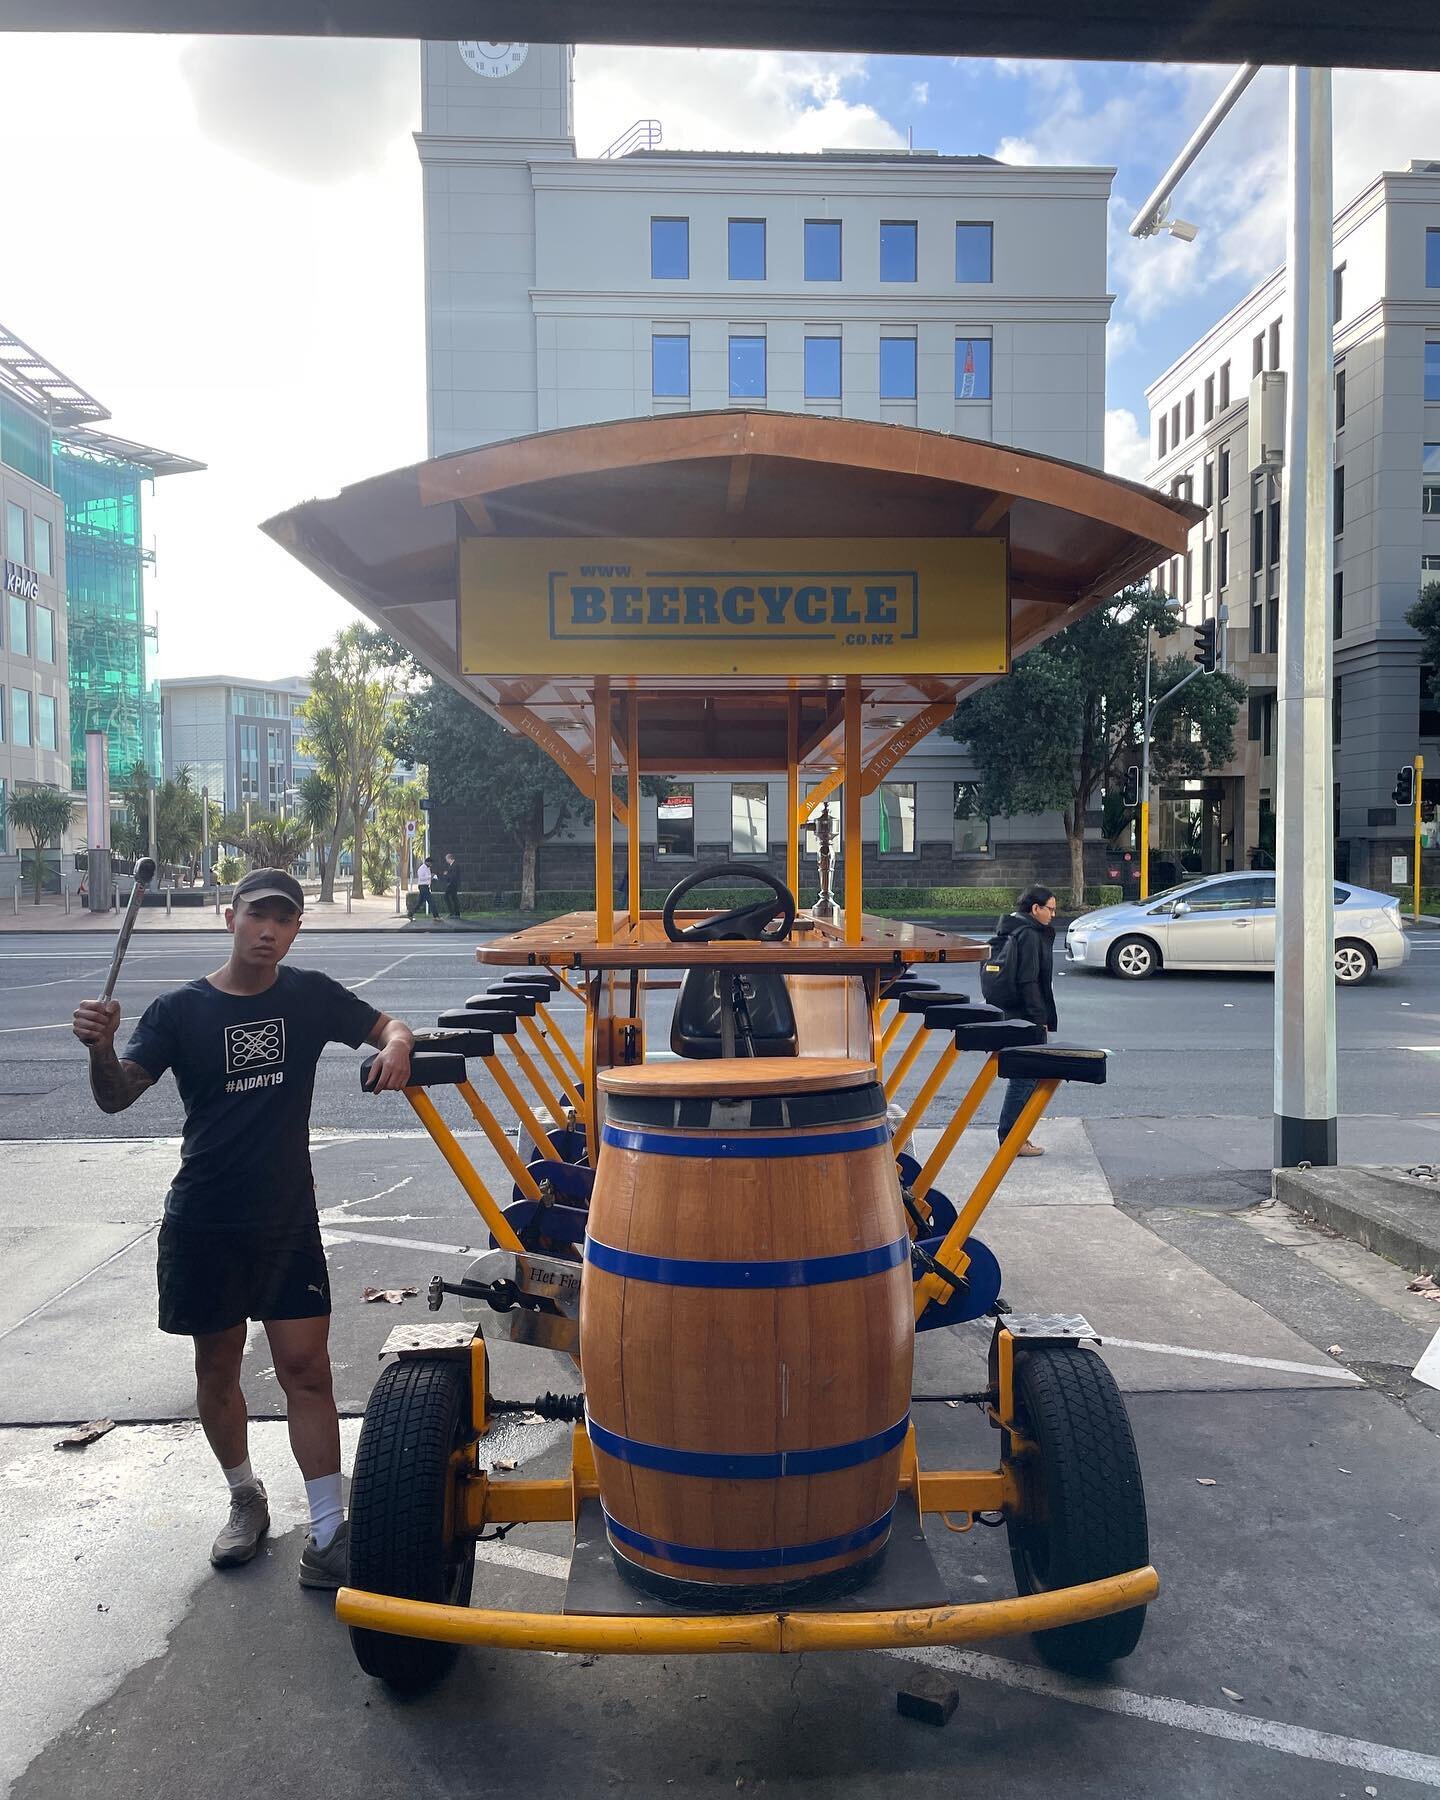 Had a good laugh servicing the beer cycle fleet yesterday @augmented.aug @auckland_shisha_lounge @beercyclenz #aucklandbars #aucklandcity #viaductharbour